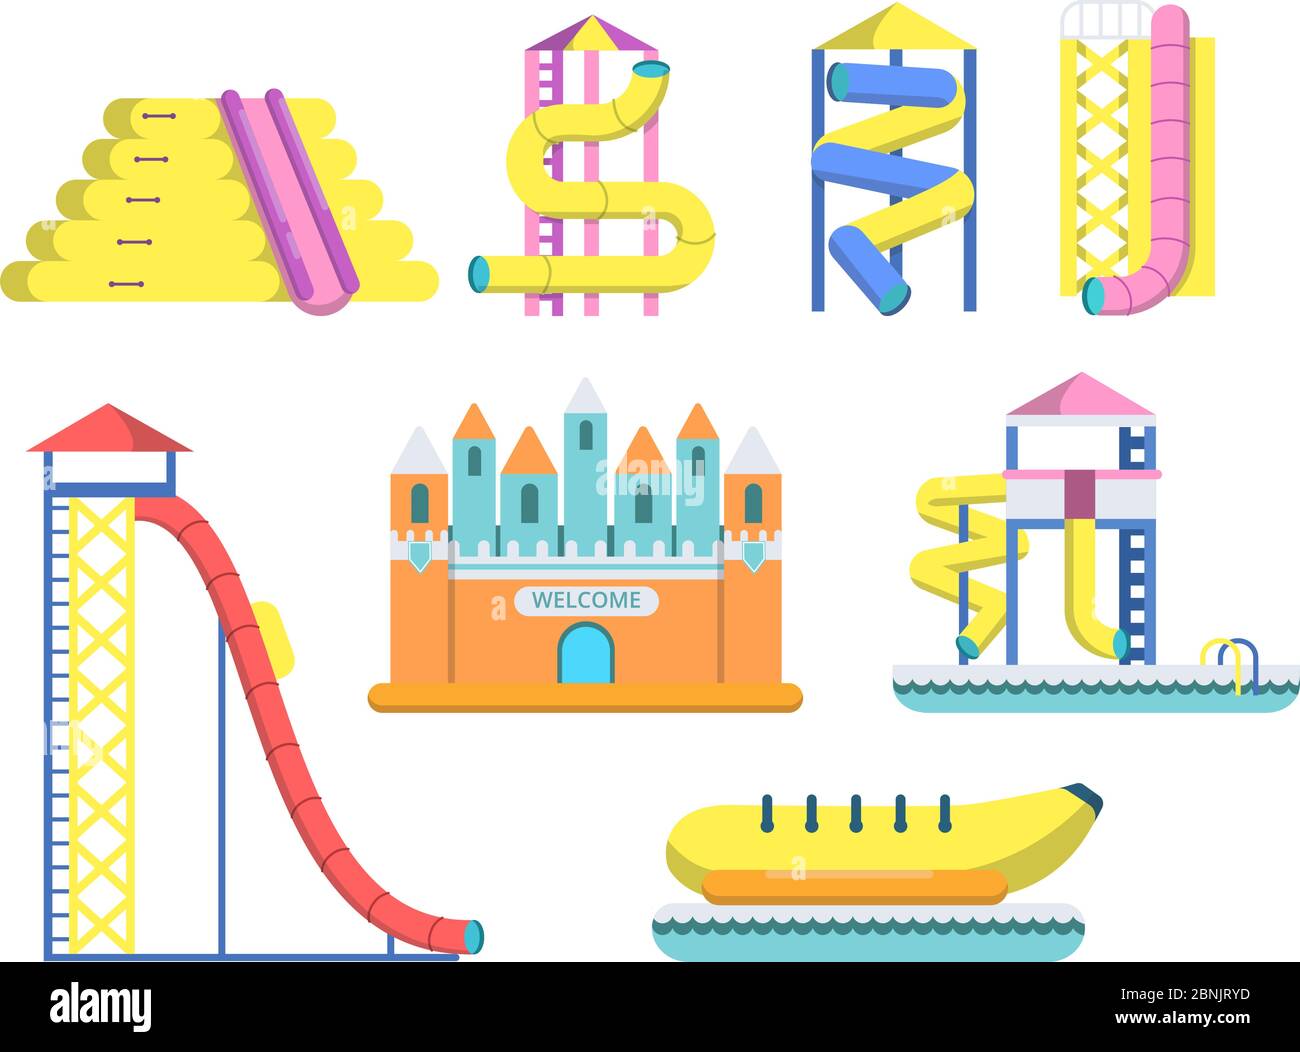 Flat illustrations of water park with various attractions Stock Vector